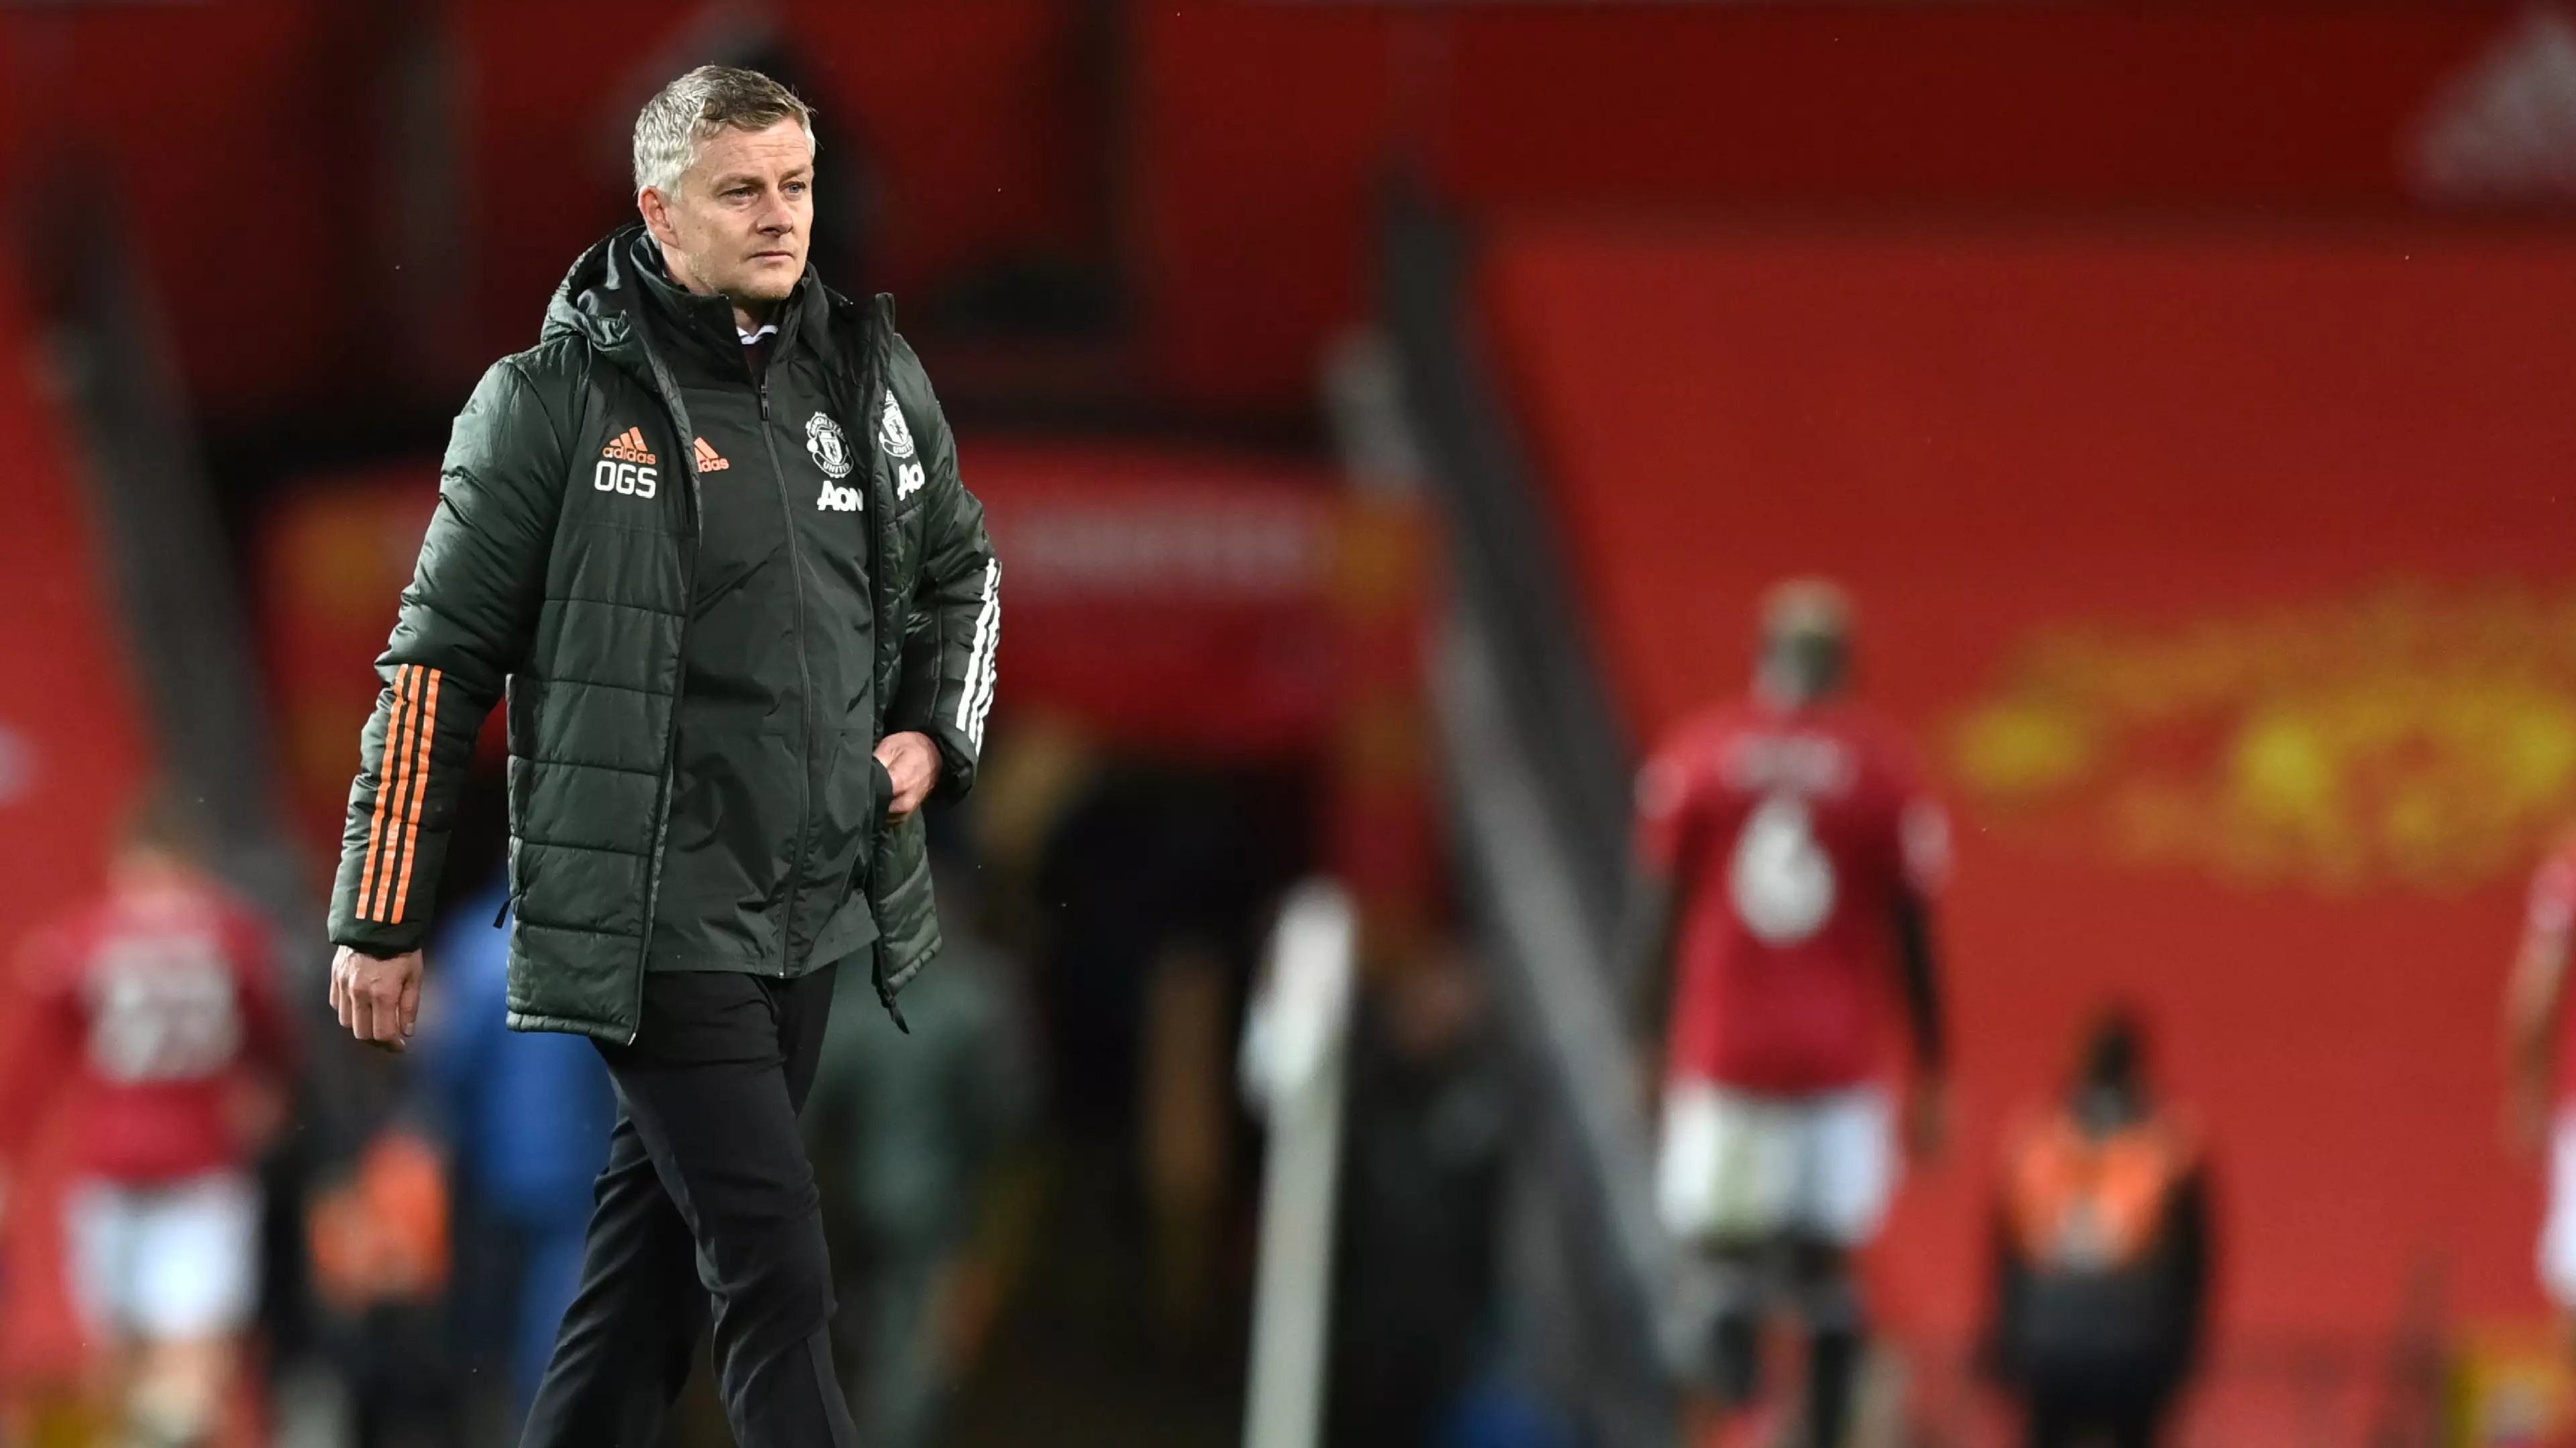 Ole Gunnar Solskjaer Warned Defeat To Everton In 'Enormous' Game Could See Him Sacked